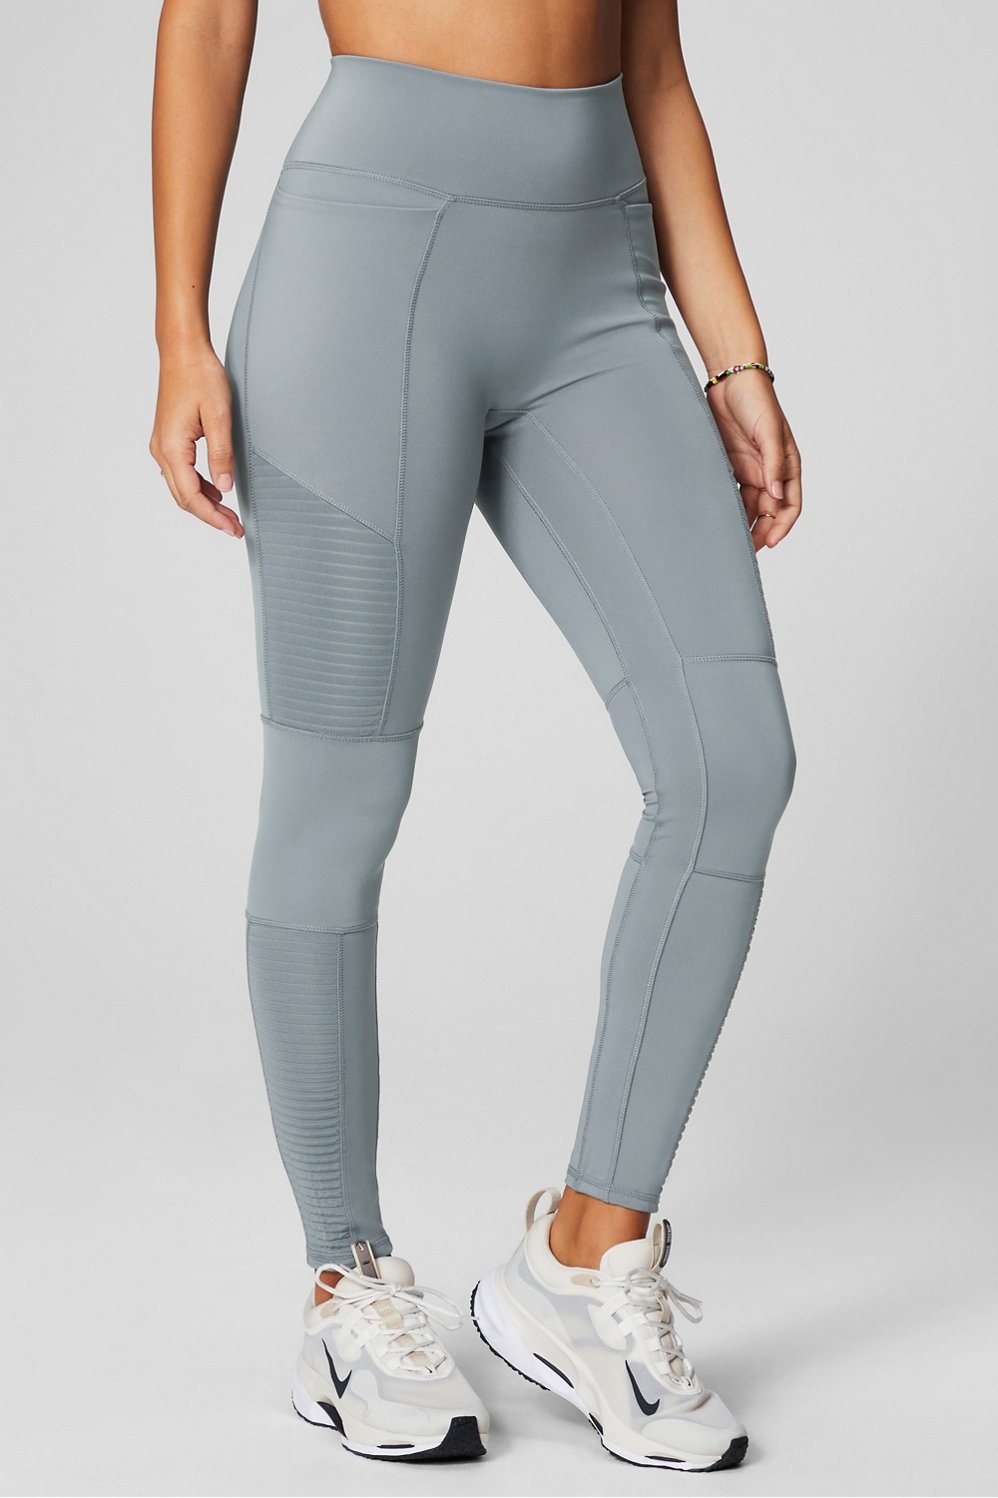 Clothing & Shoes - Bottoms - Leggings - Mr. Max Hollywood Legging - Online  Shopping for Canadians